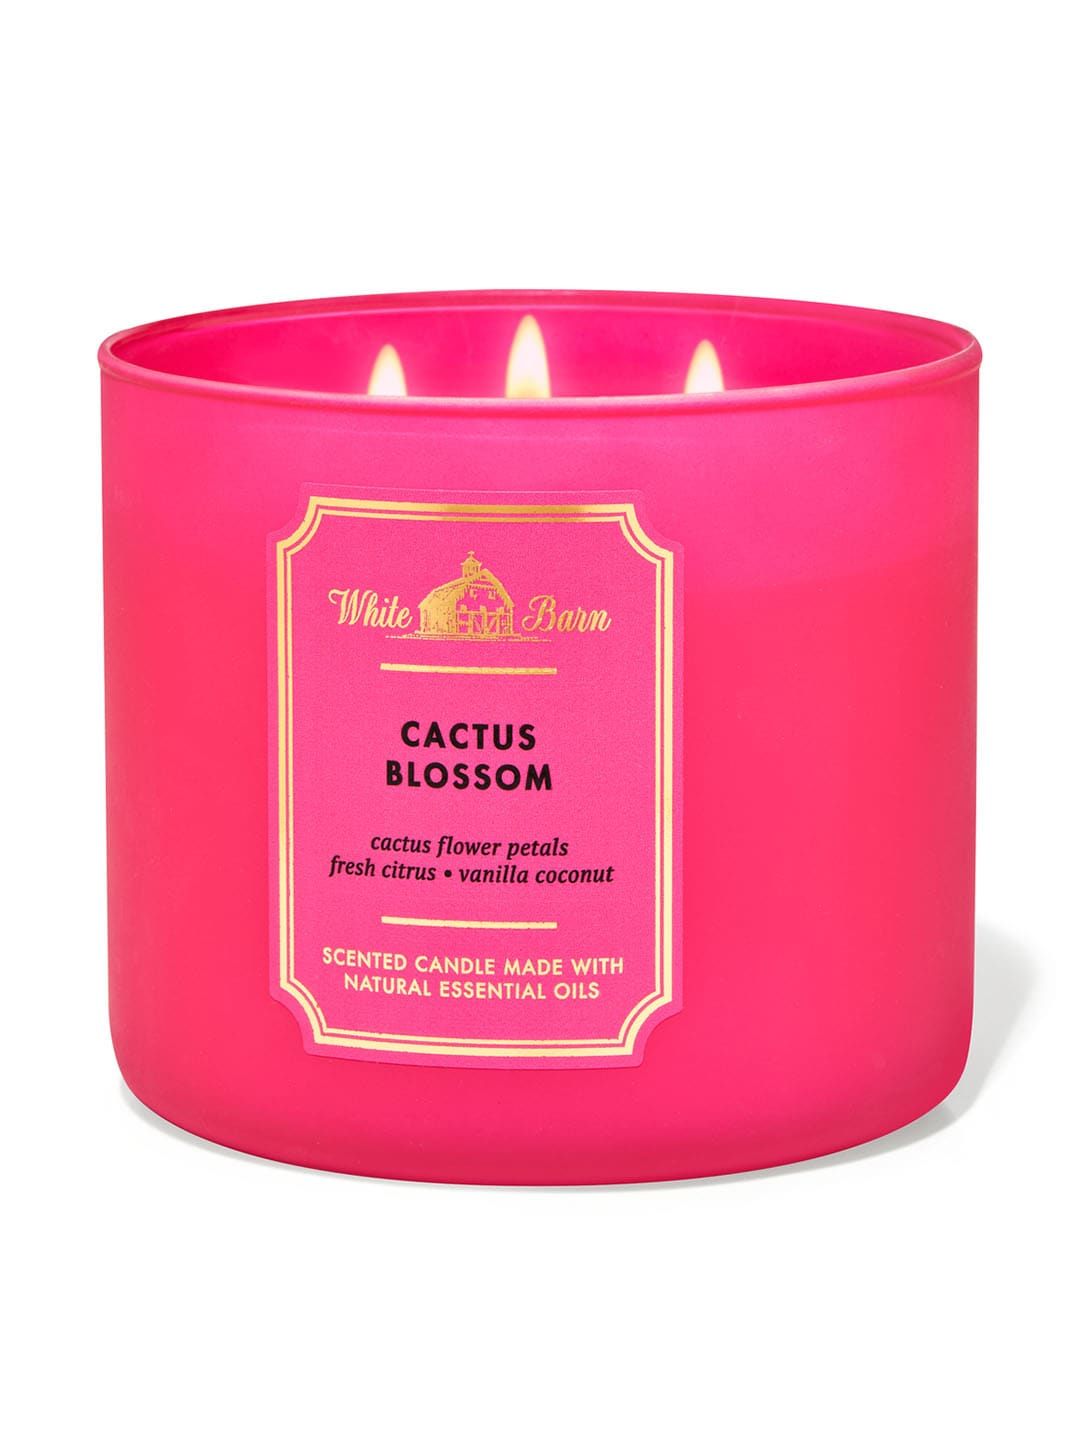 Bath & Body Works Cactus Blossom 3-Wick Scented Candle - 411g Price in India